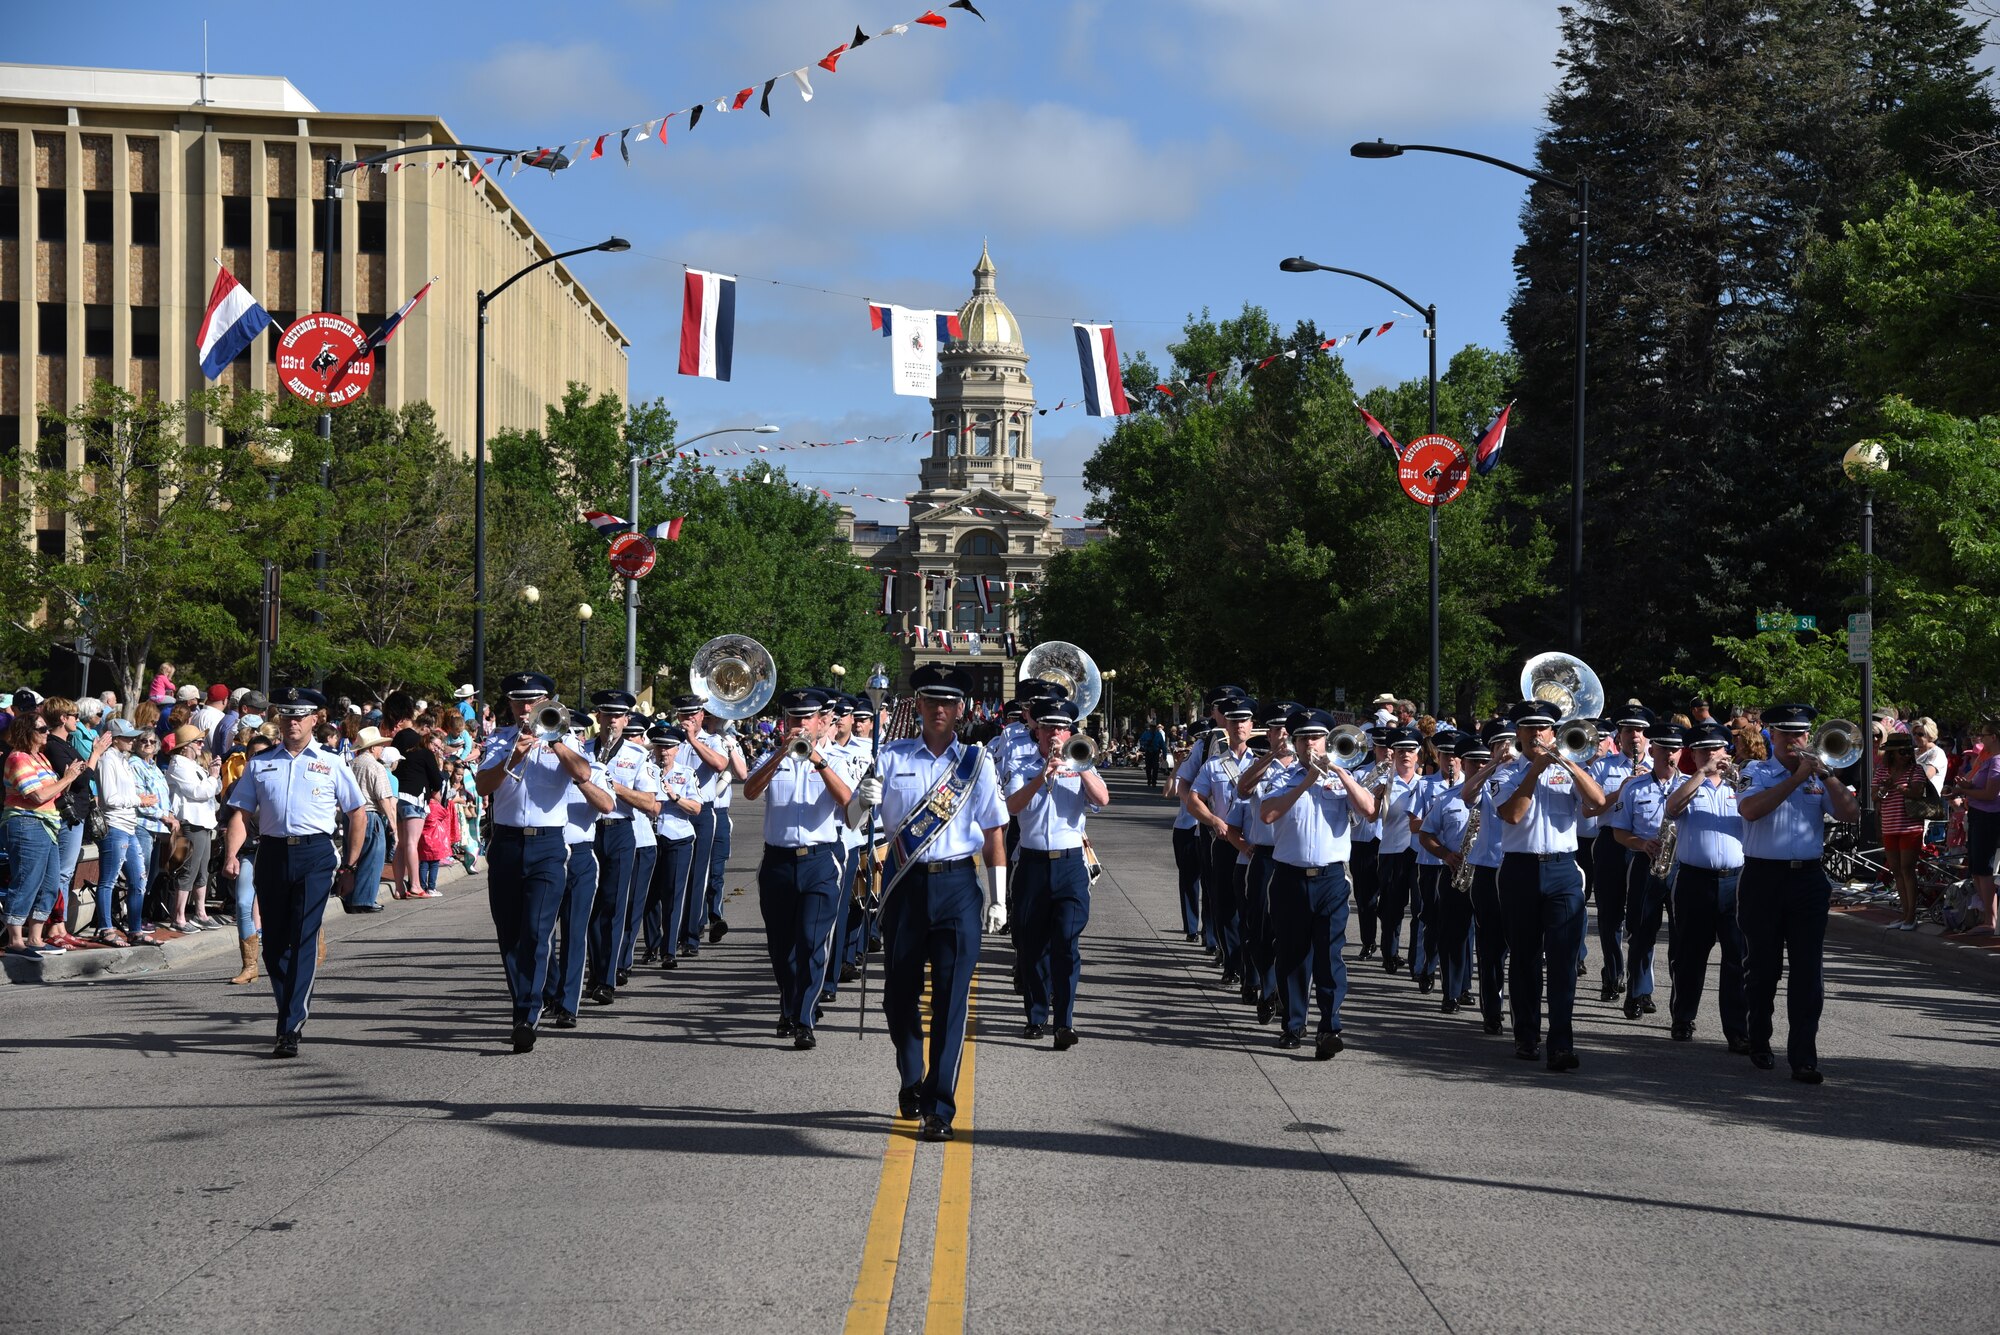 Members of the U.S. Air Force Academy Band play music as they march down the streets of Cheyenne, Wyo., during the 123rd Cheyenne Frontier Days opening Grand Parade, July 20, 2019. Airmen play many roles in making CFD, the biggest event in Cheyenne, a success. The two communities came together to celebrate during the CFD rodeo and festival. (U.S. Air Force photo by Glenn S. Robertson)